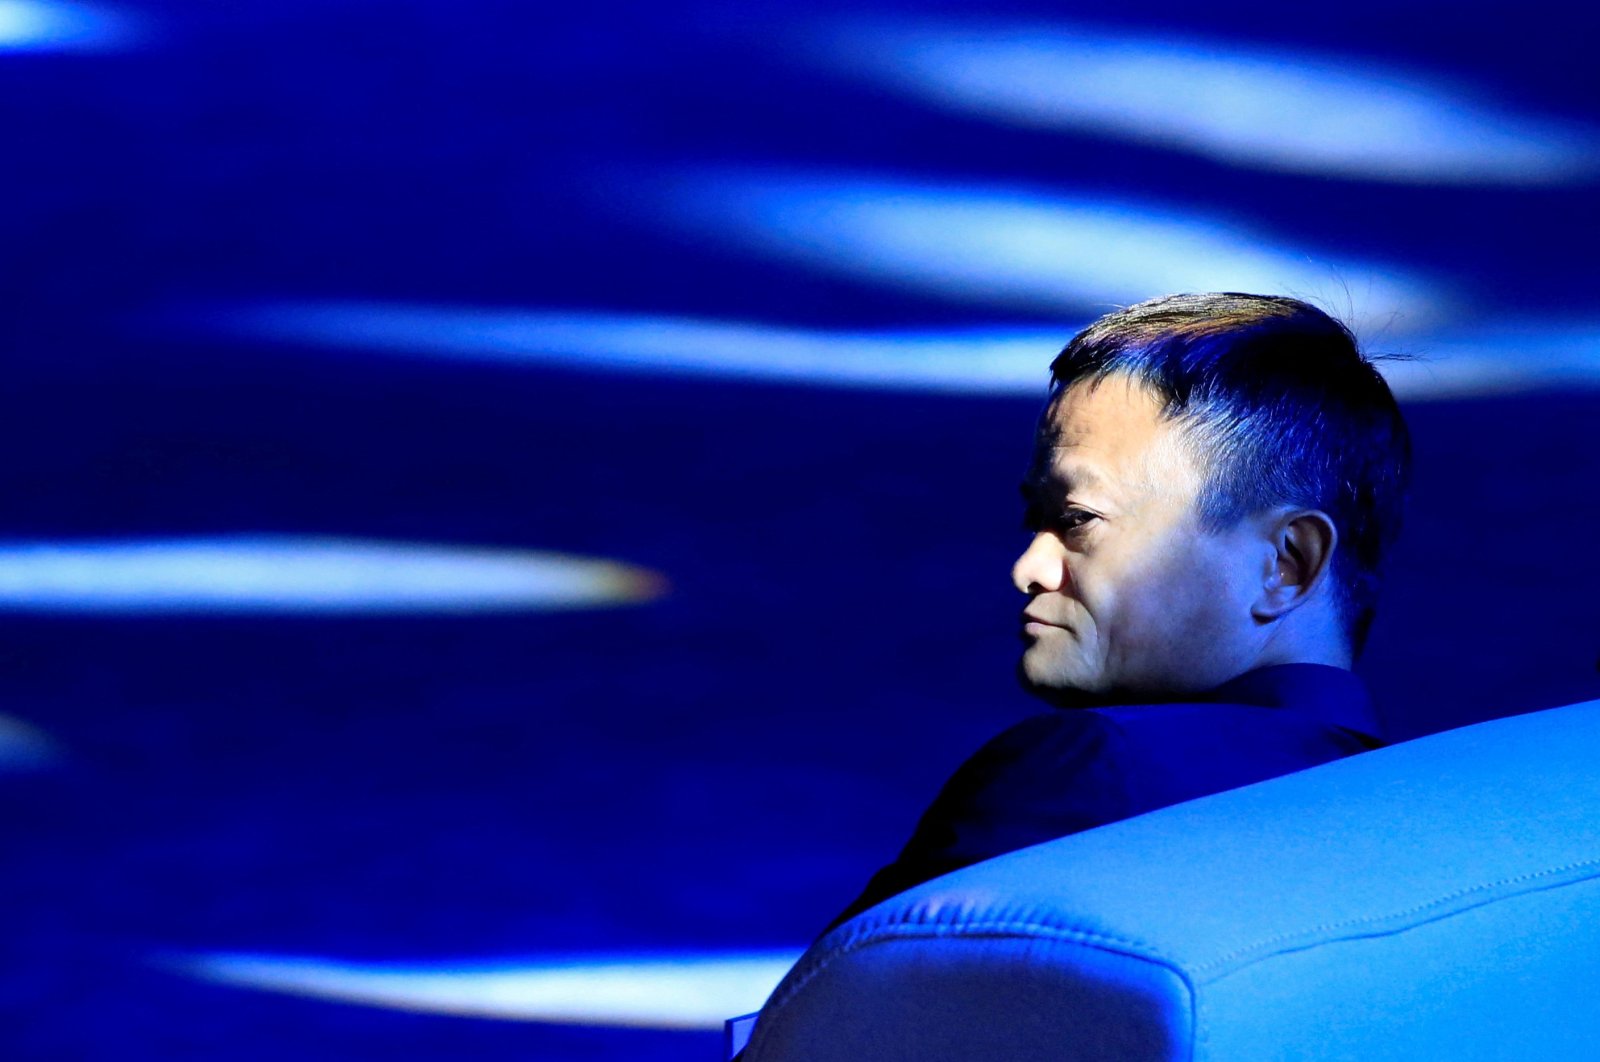 Alibaba Group co-founder and executive chairman Jack Ma attends the World Artificial Intelligence Conference (WAIC) in Shanghai, China, Sept. 17, 2018. (Reuters Photo)